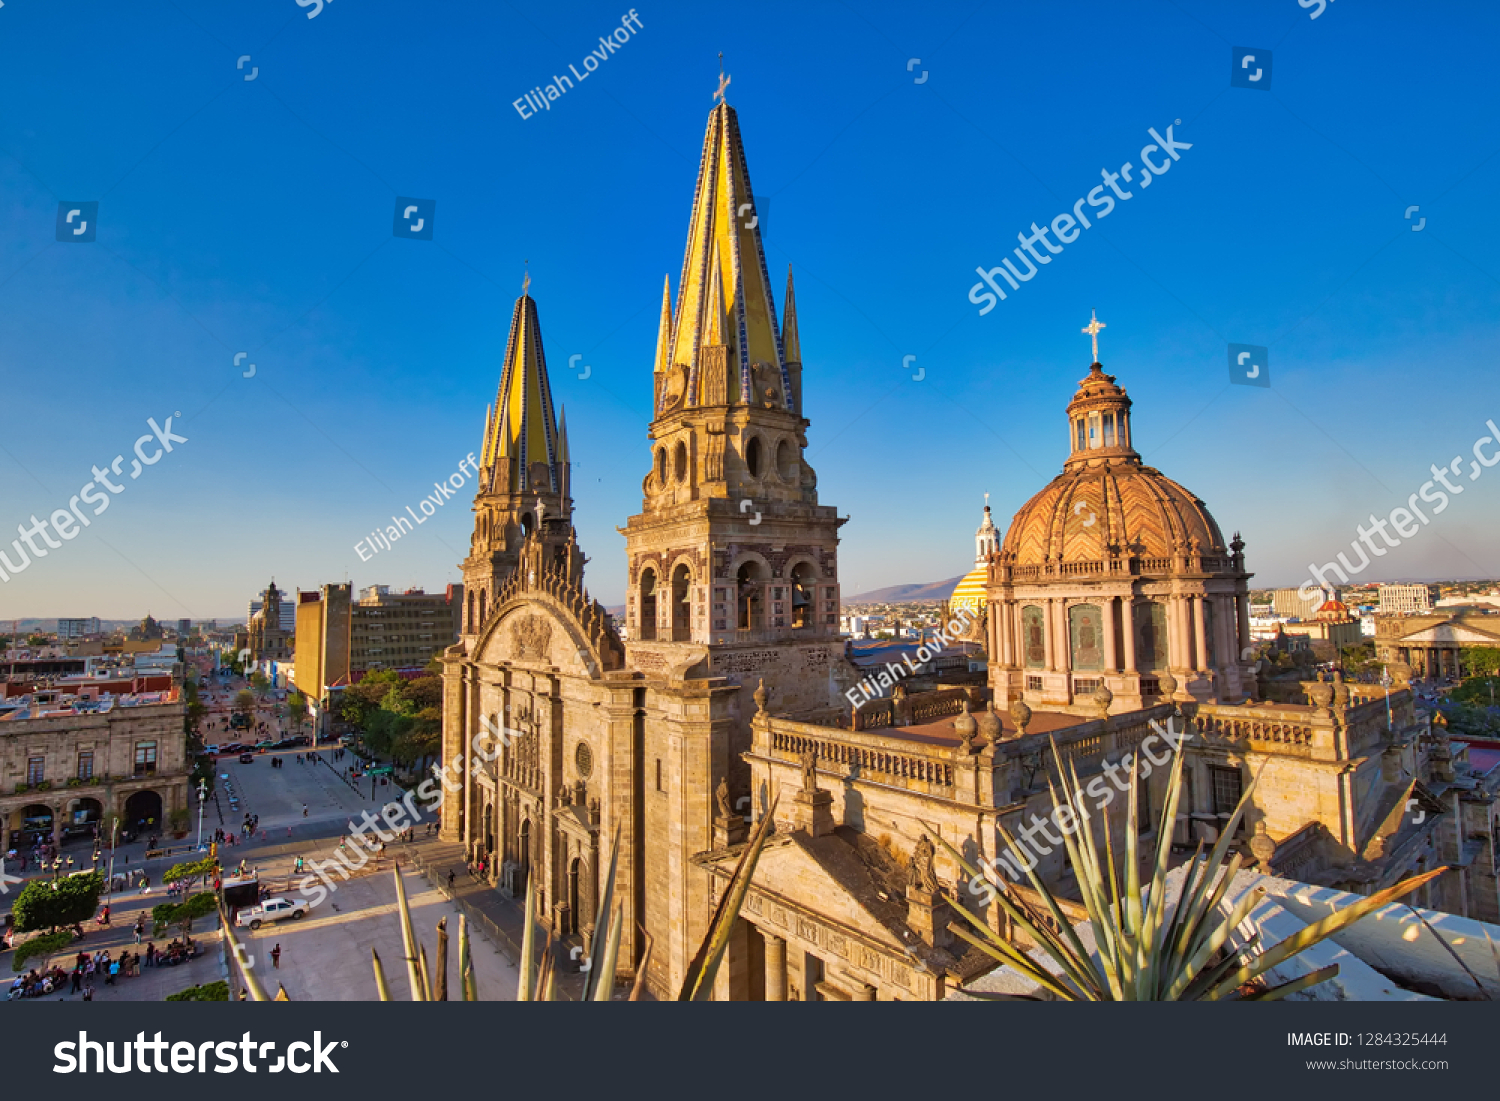 Guadalajara Central Cathedral (Cathedral of the Assumption of Our Lady), in Jalisco, Mexico #1284325444